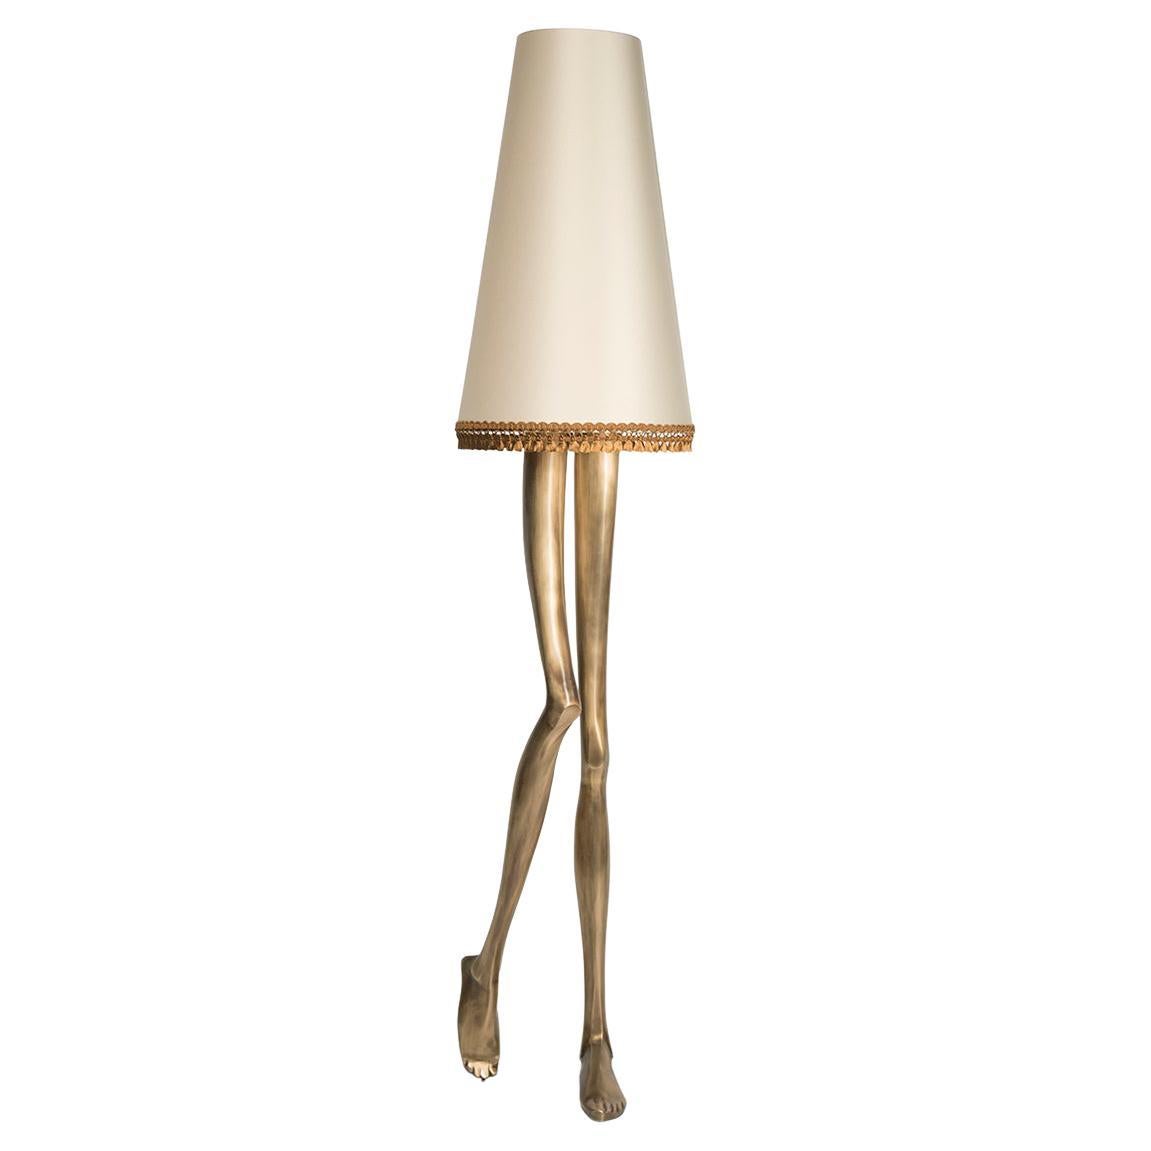 Contemporary Monroe Floor Lamp in Oxidized Brushed Brass and Off White Lampshade